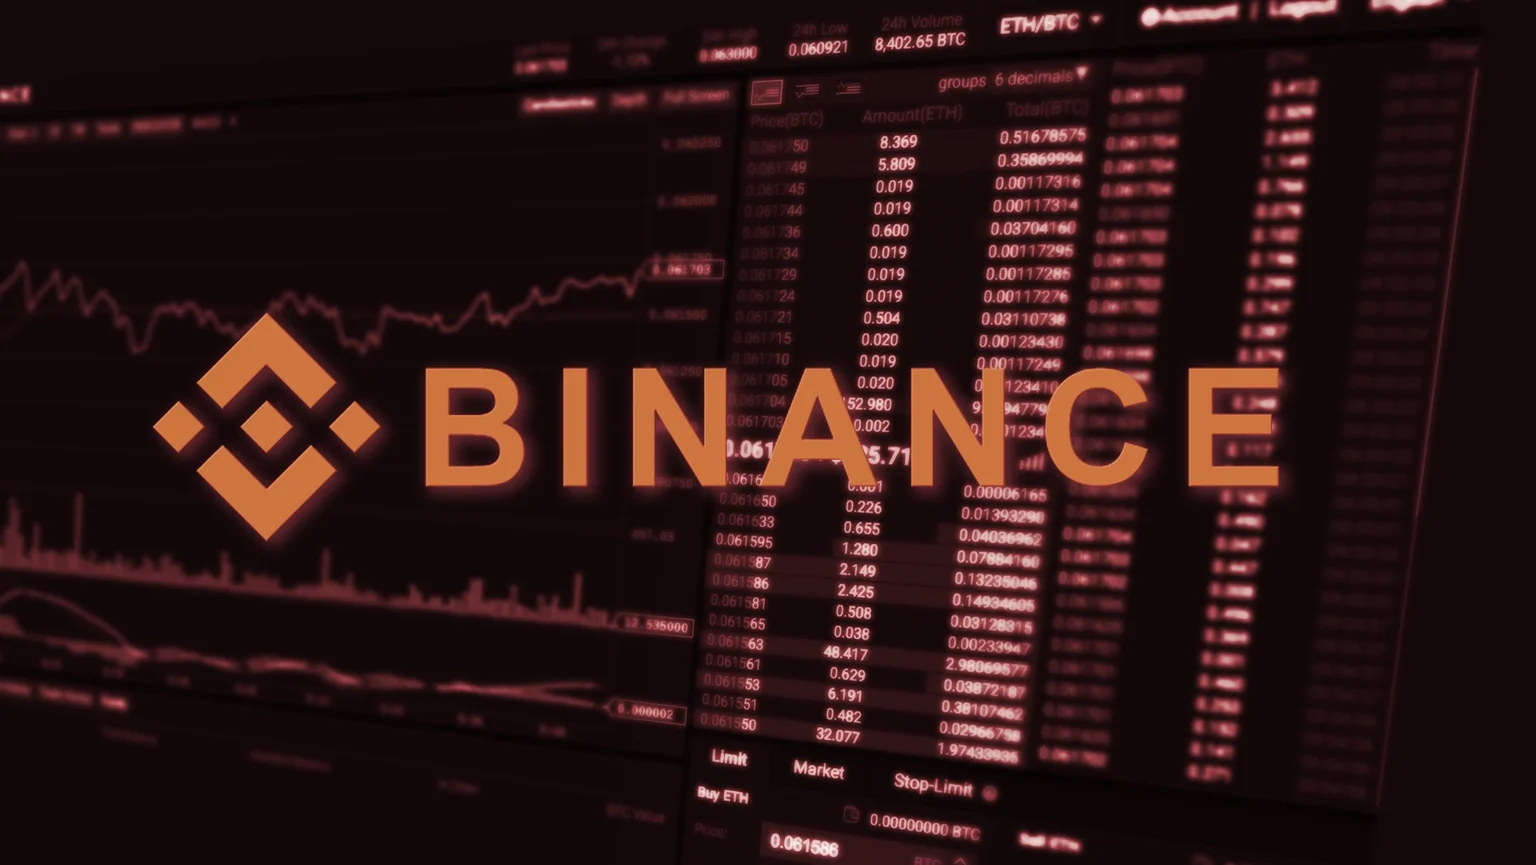 Binance is one of the largest cryptocurrency exchanges in the world (Image: Shutterstock)